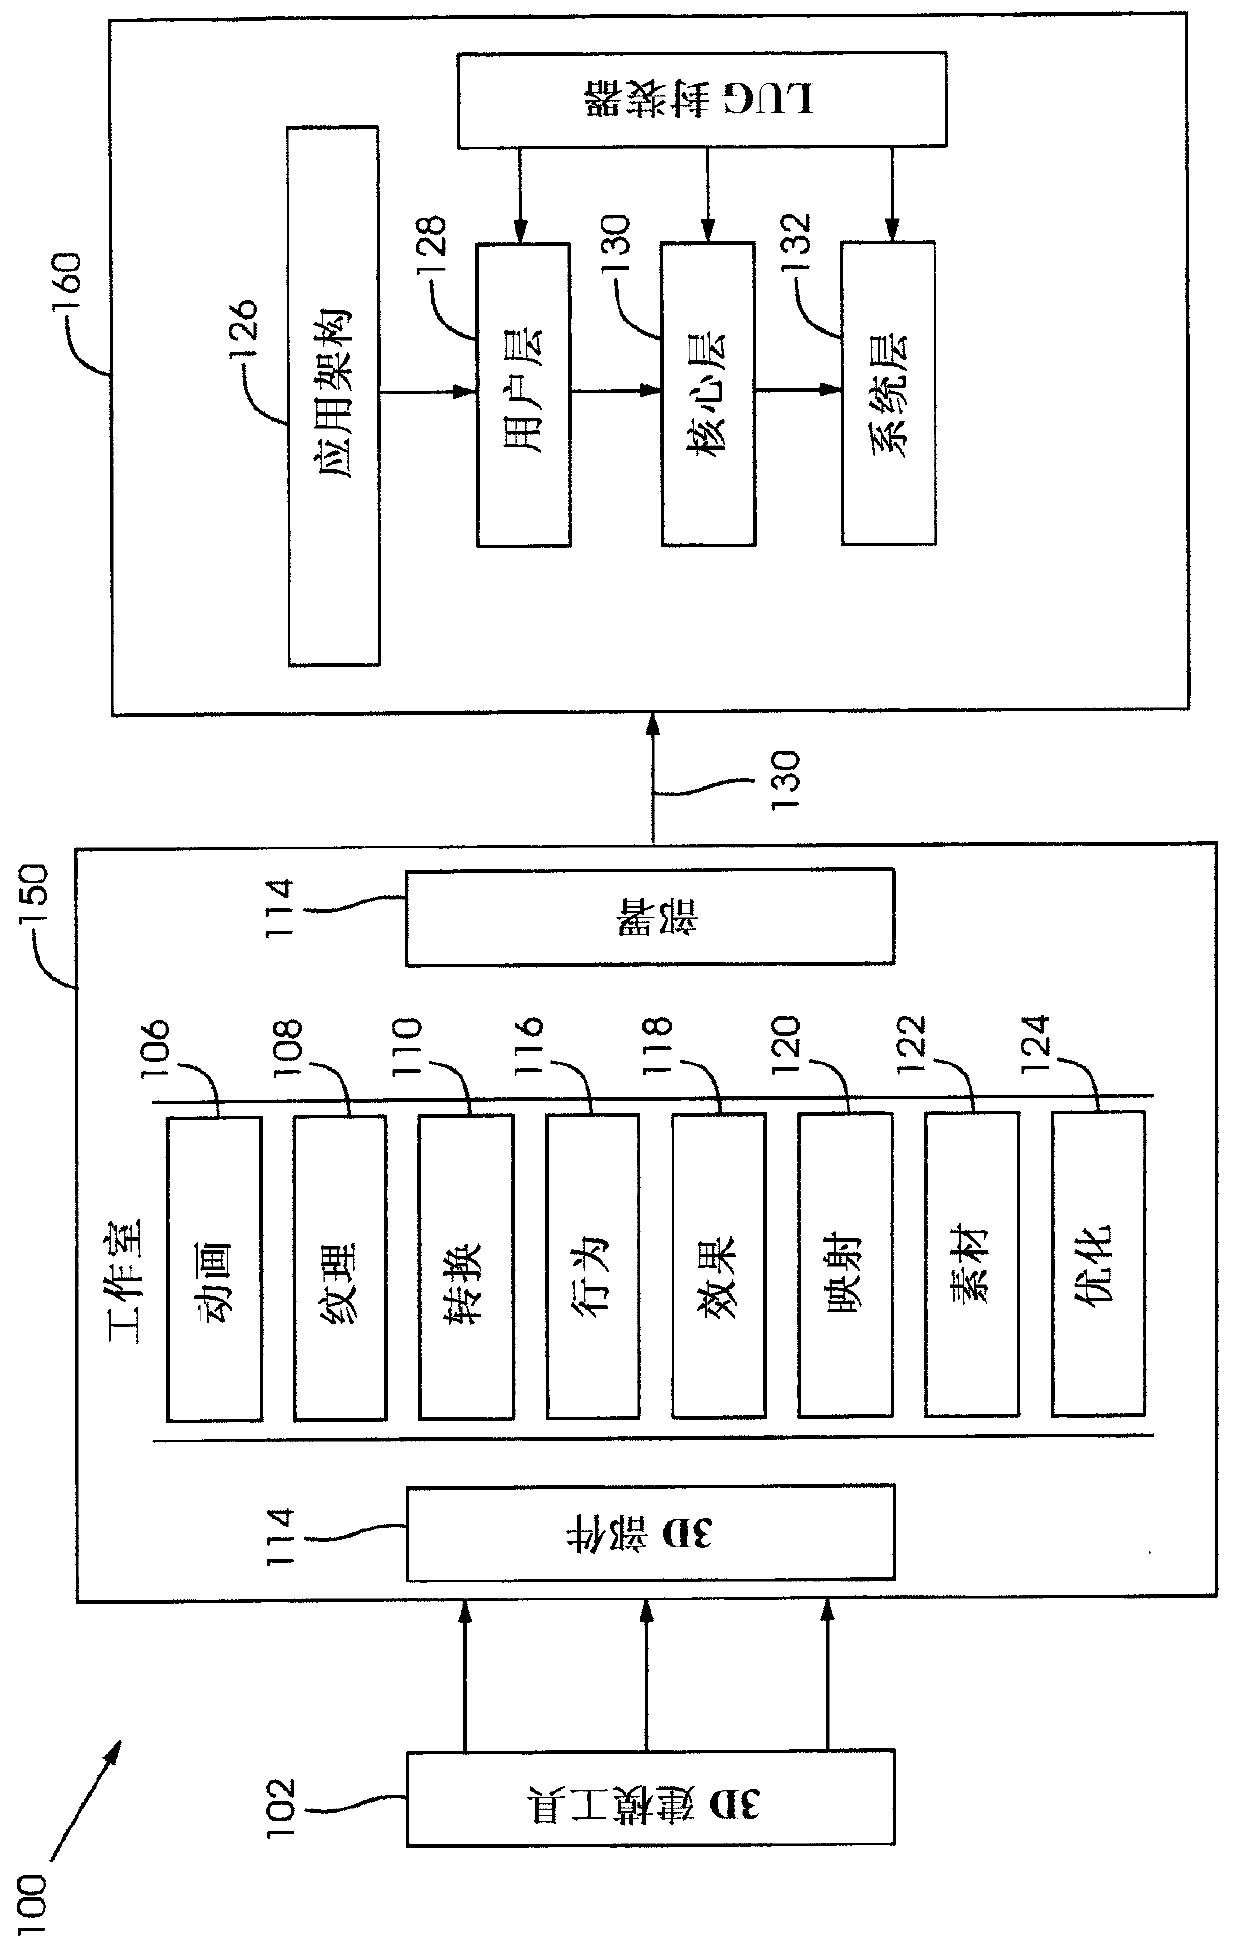 Method and system for generating three-dimensional user-interface for embedded device